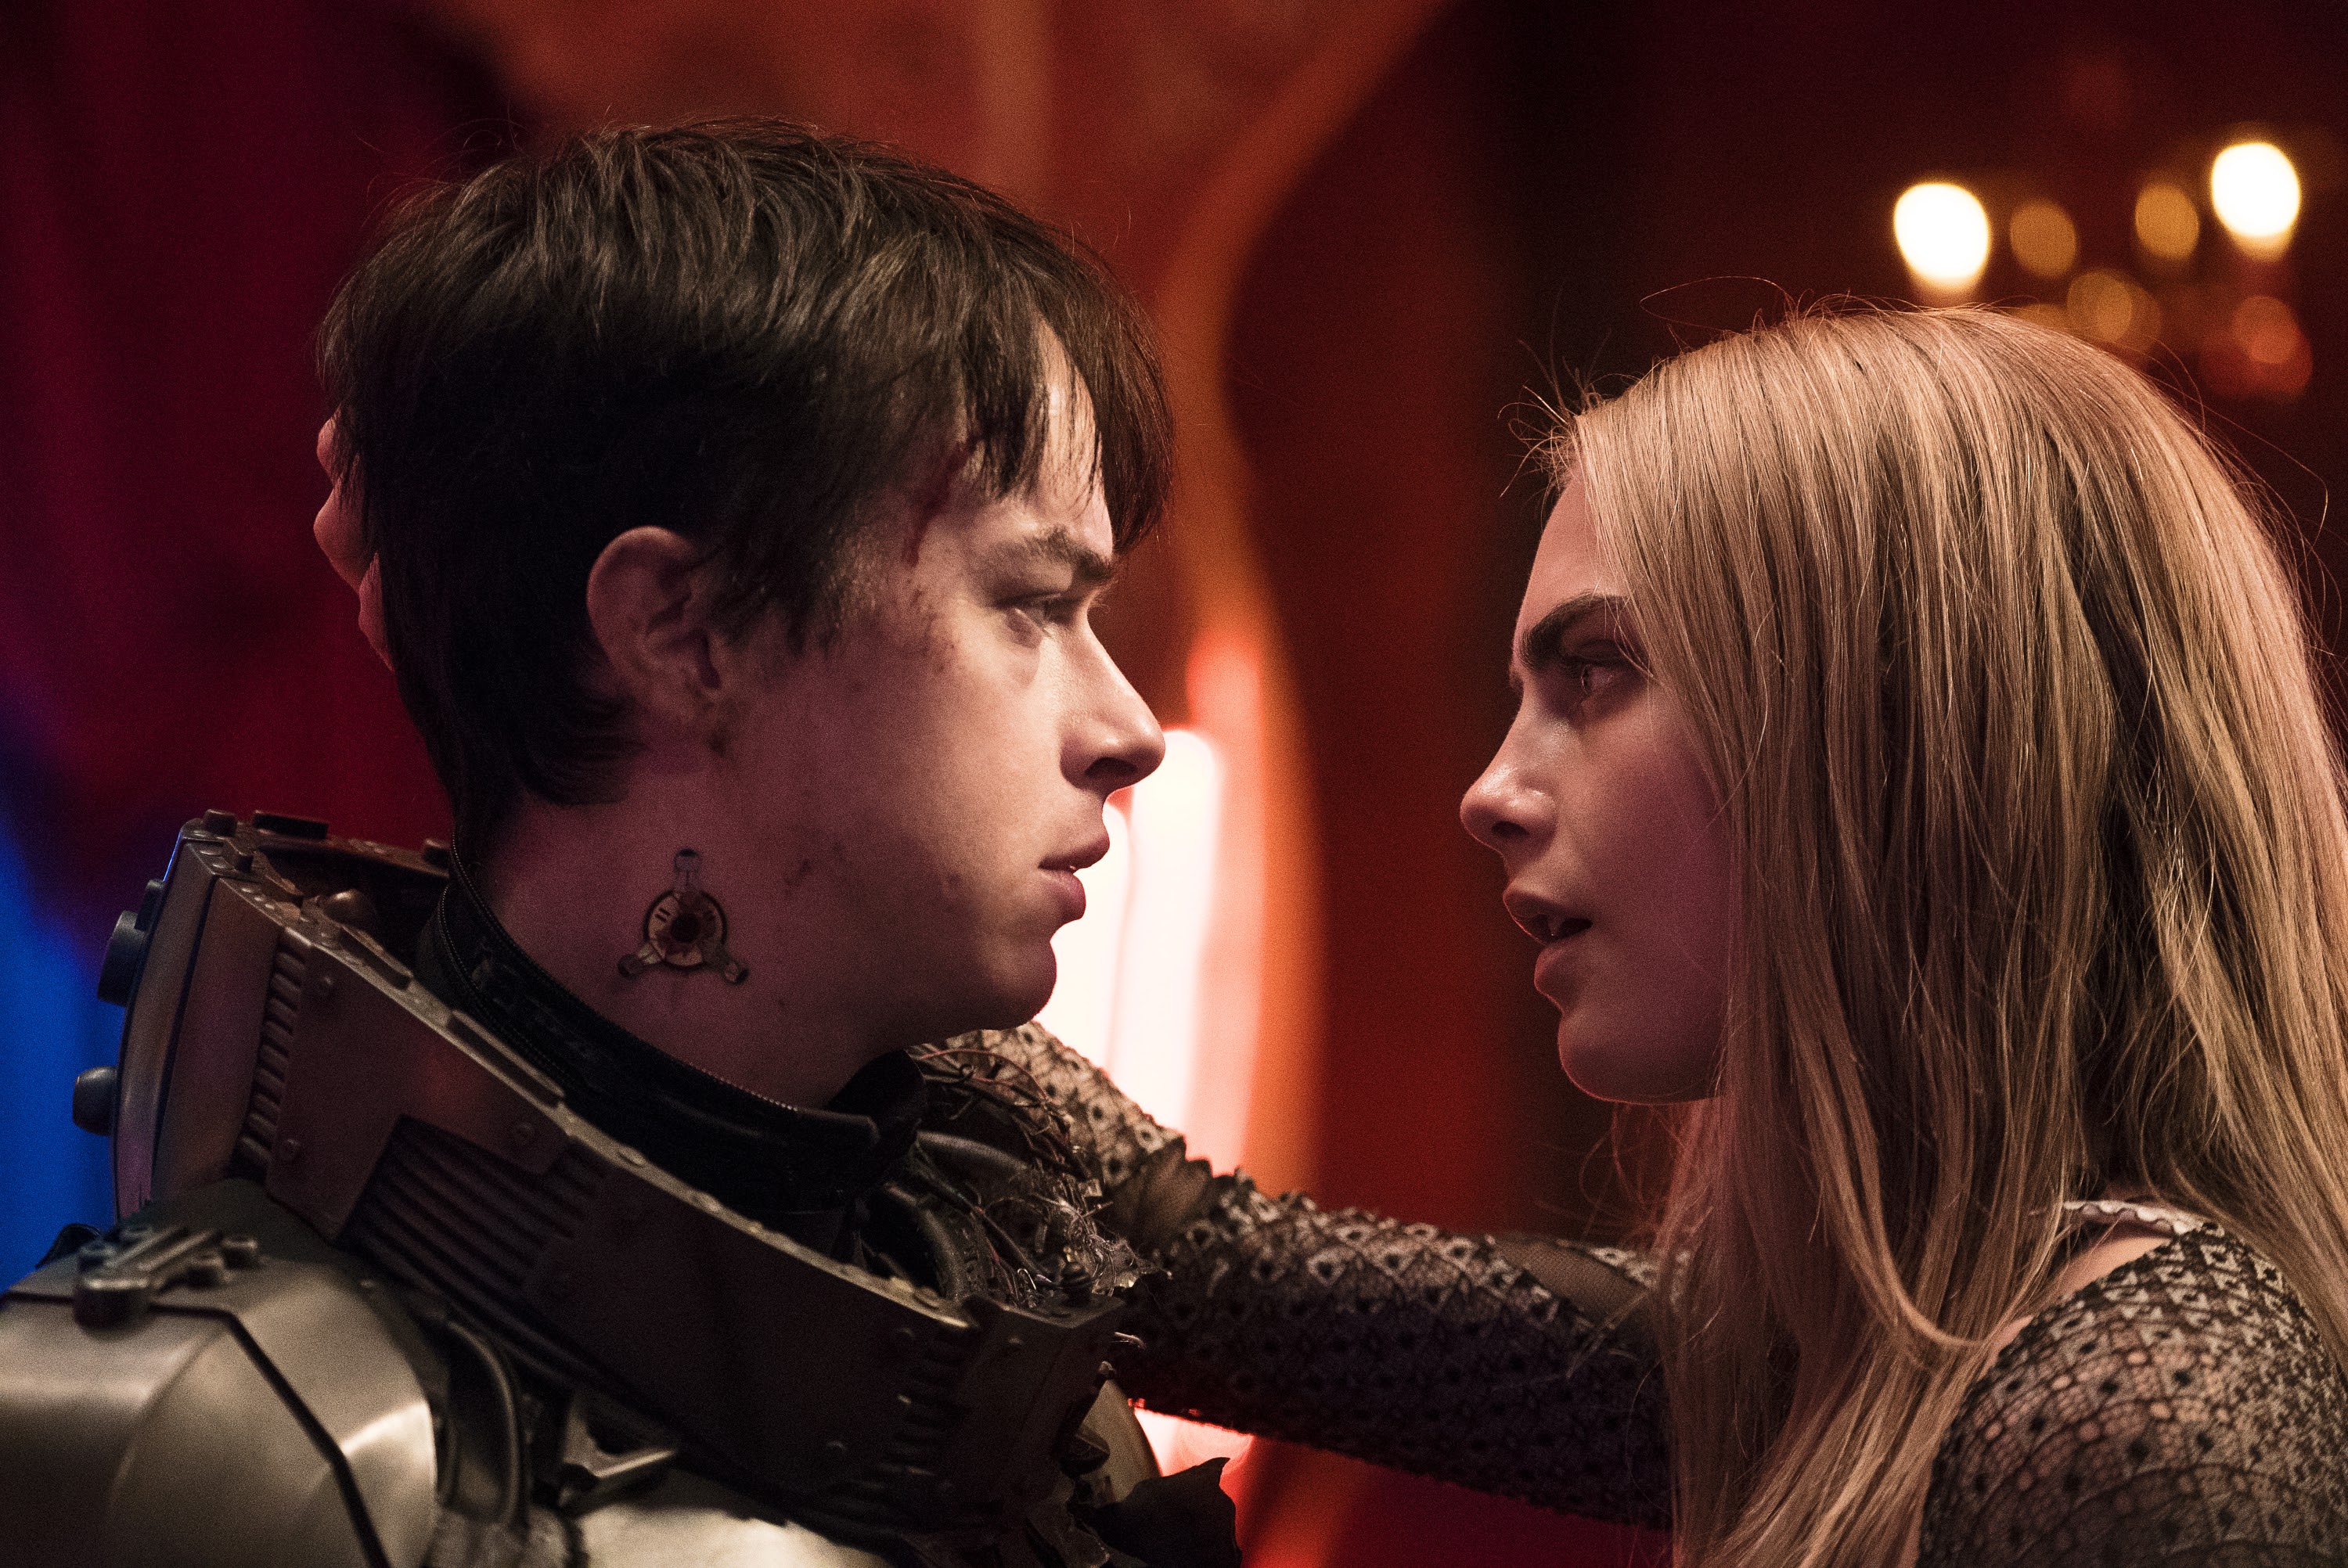 When office romances get serious - Dane DeHaan and Cara Delevingne in Valerian and the City of a Thousand Planets. Image via hdqwalls.com | Valerian and the City of a Thousand Planets movie review | onetakekate.com